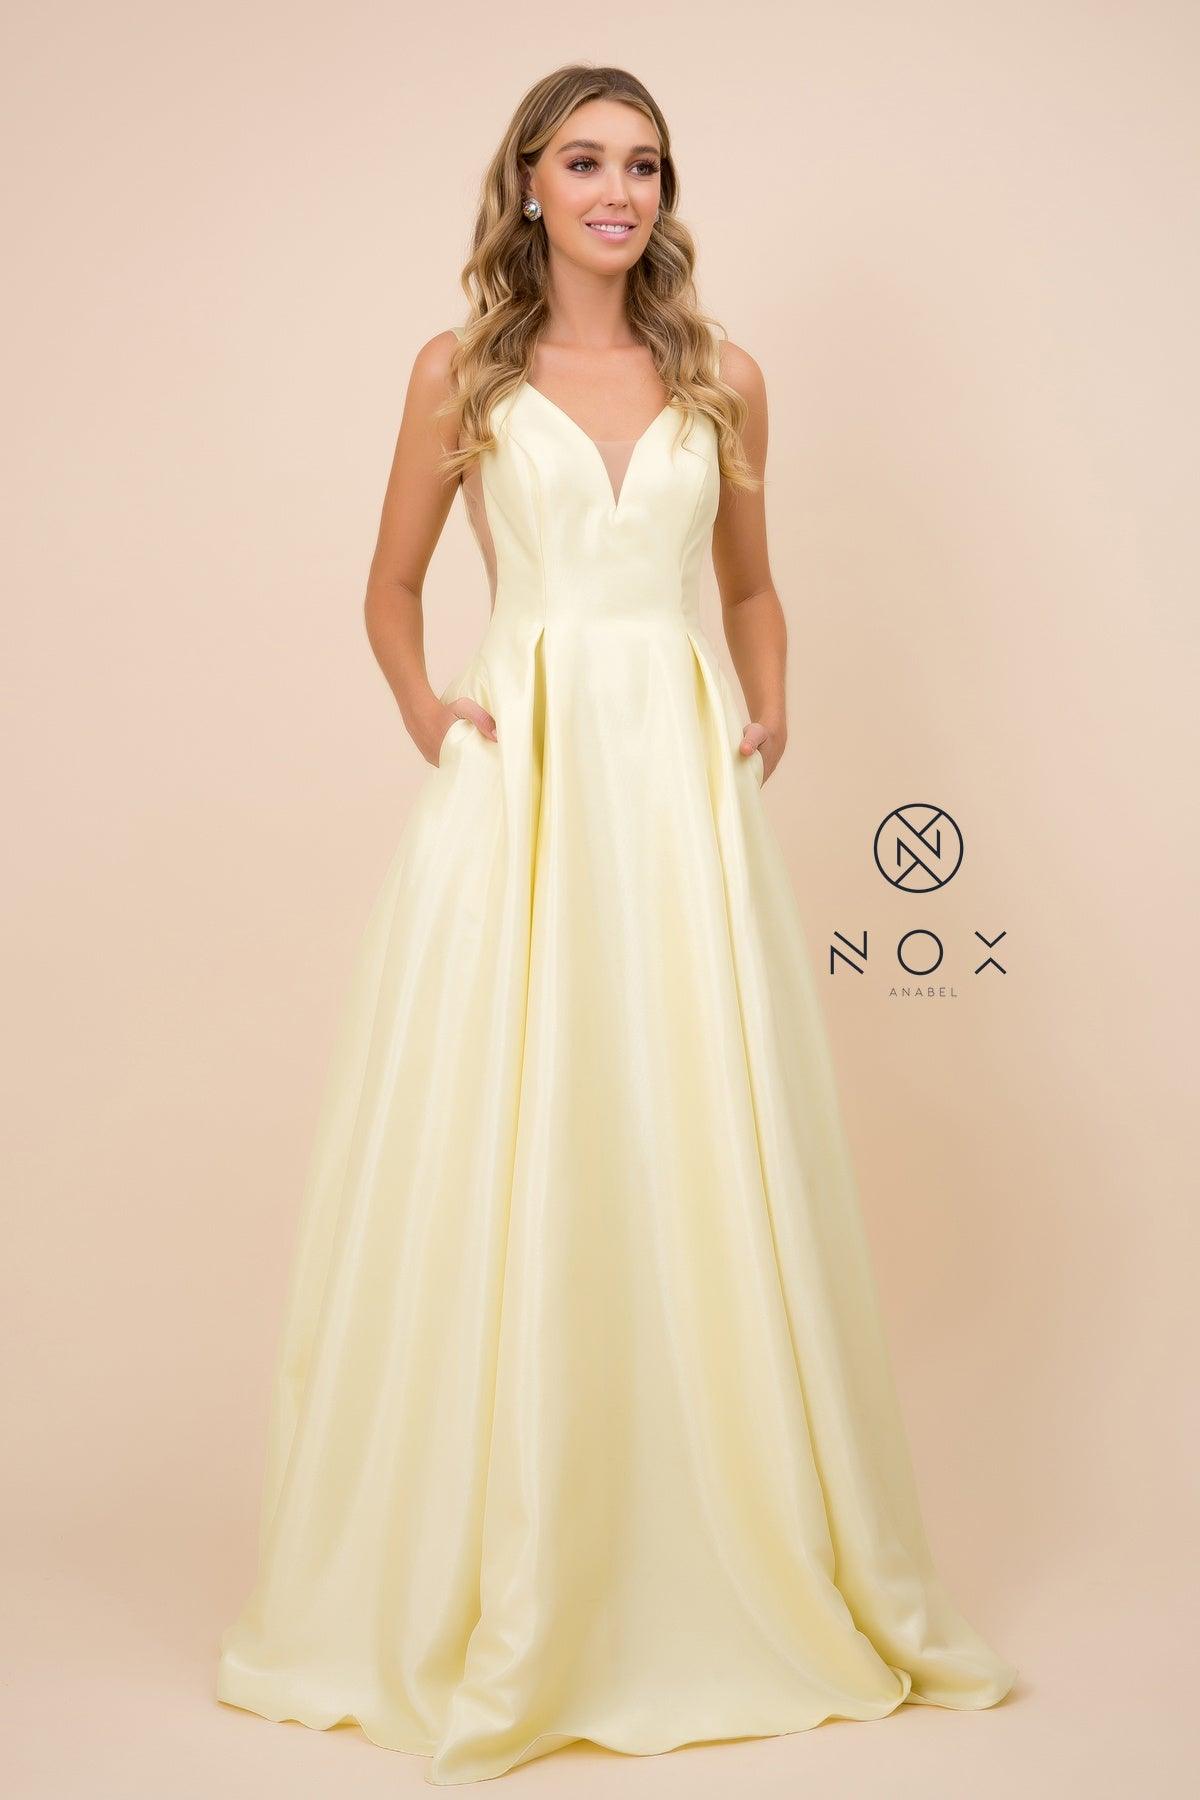 Long Open Back Prom Dress Evening Gown with Pockets - The Dress Outlet Nox Anabel